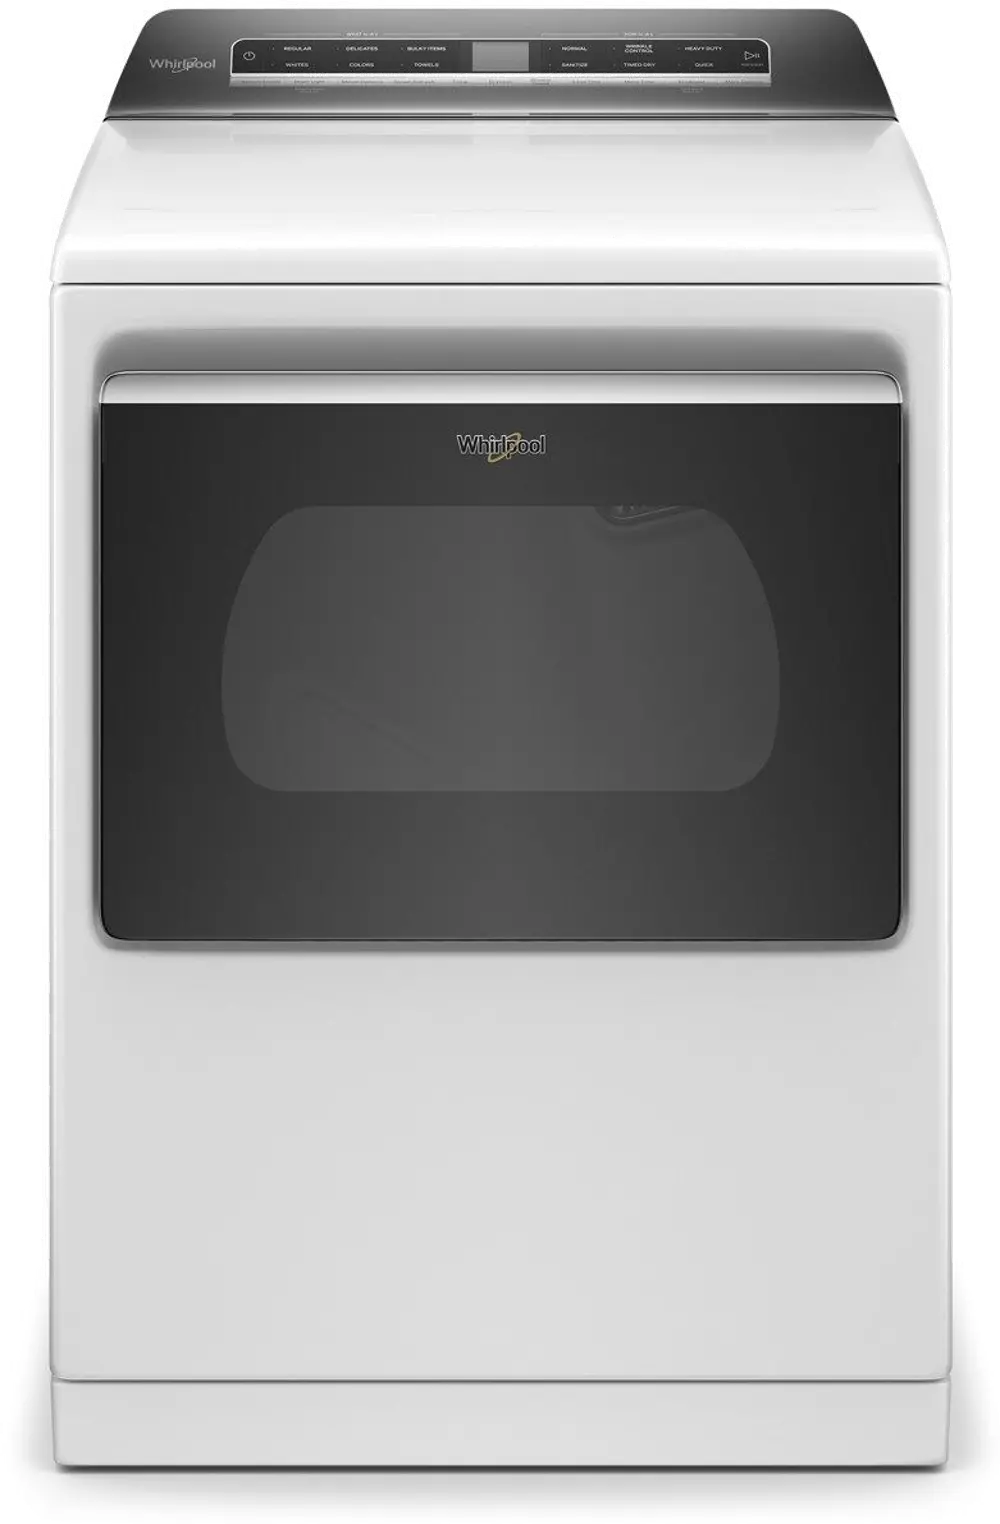 WED8127LW Whirlpool 7.4 cu ft Electric Dryer - White W8127-1